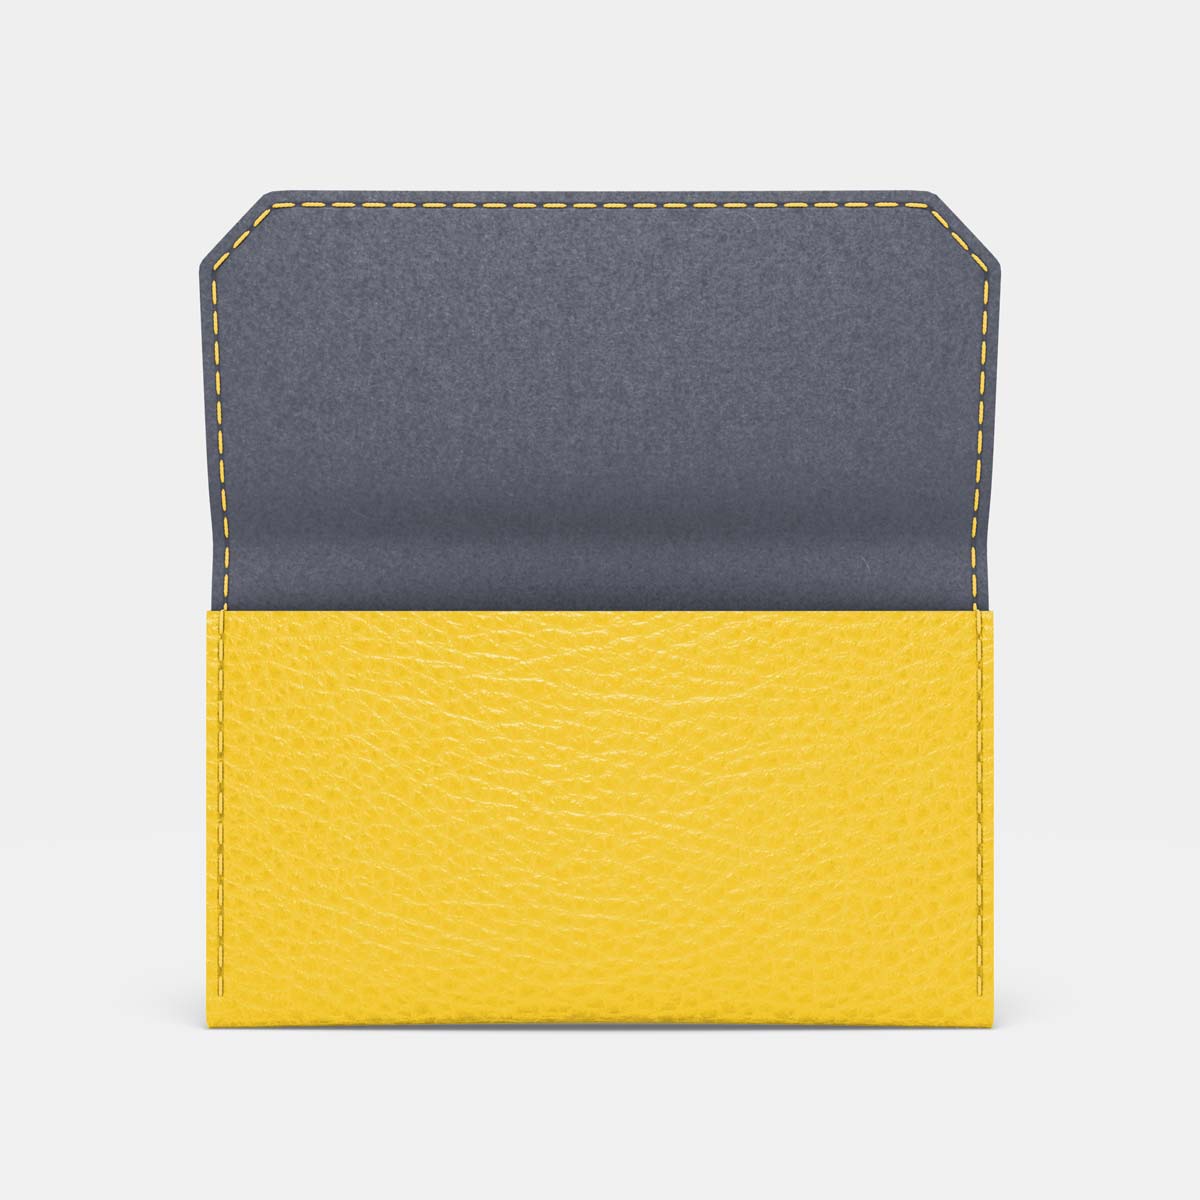 Leather Carry all Wallet - Yellow and Grey